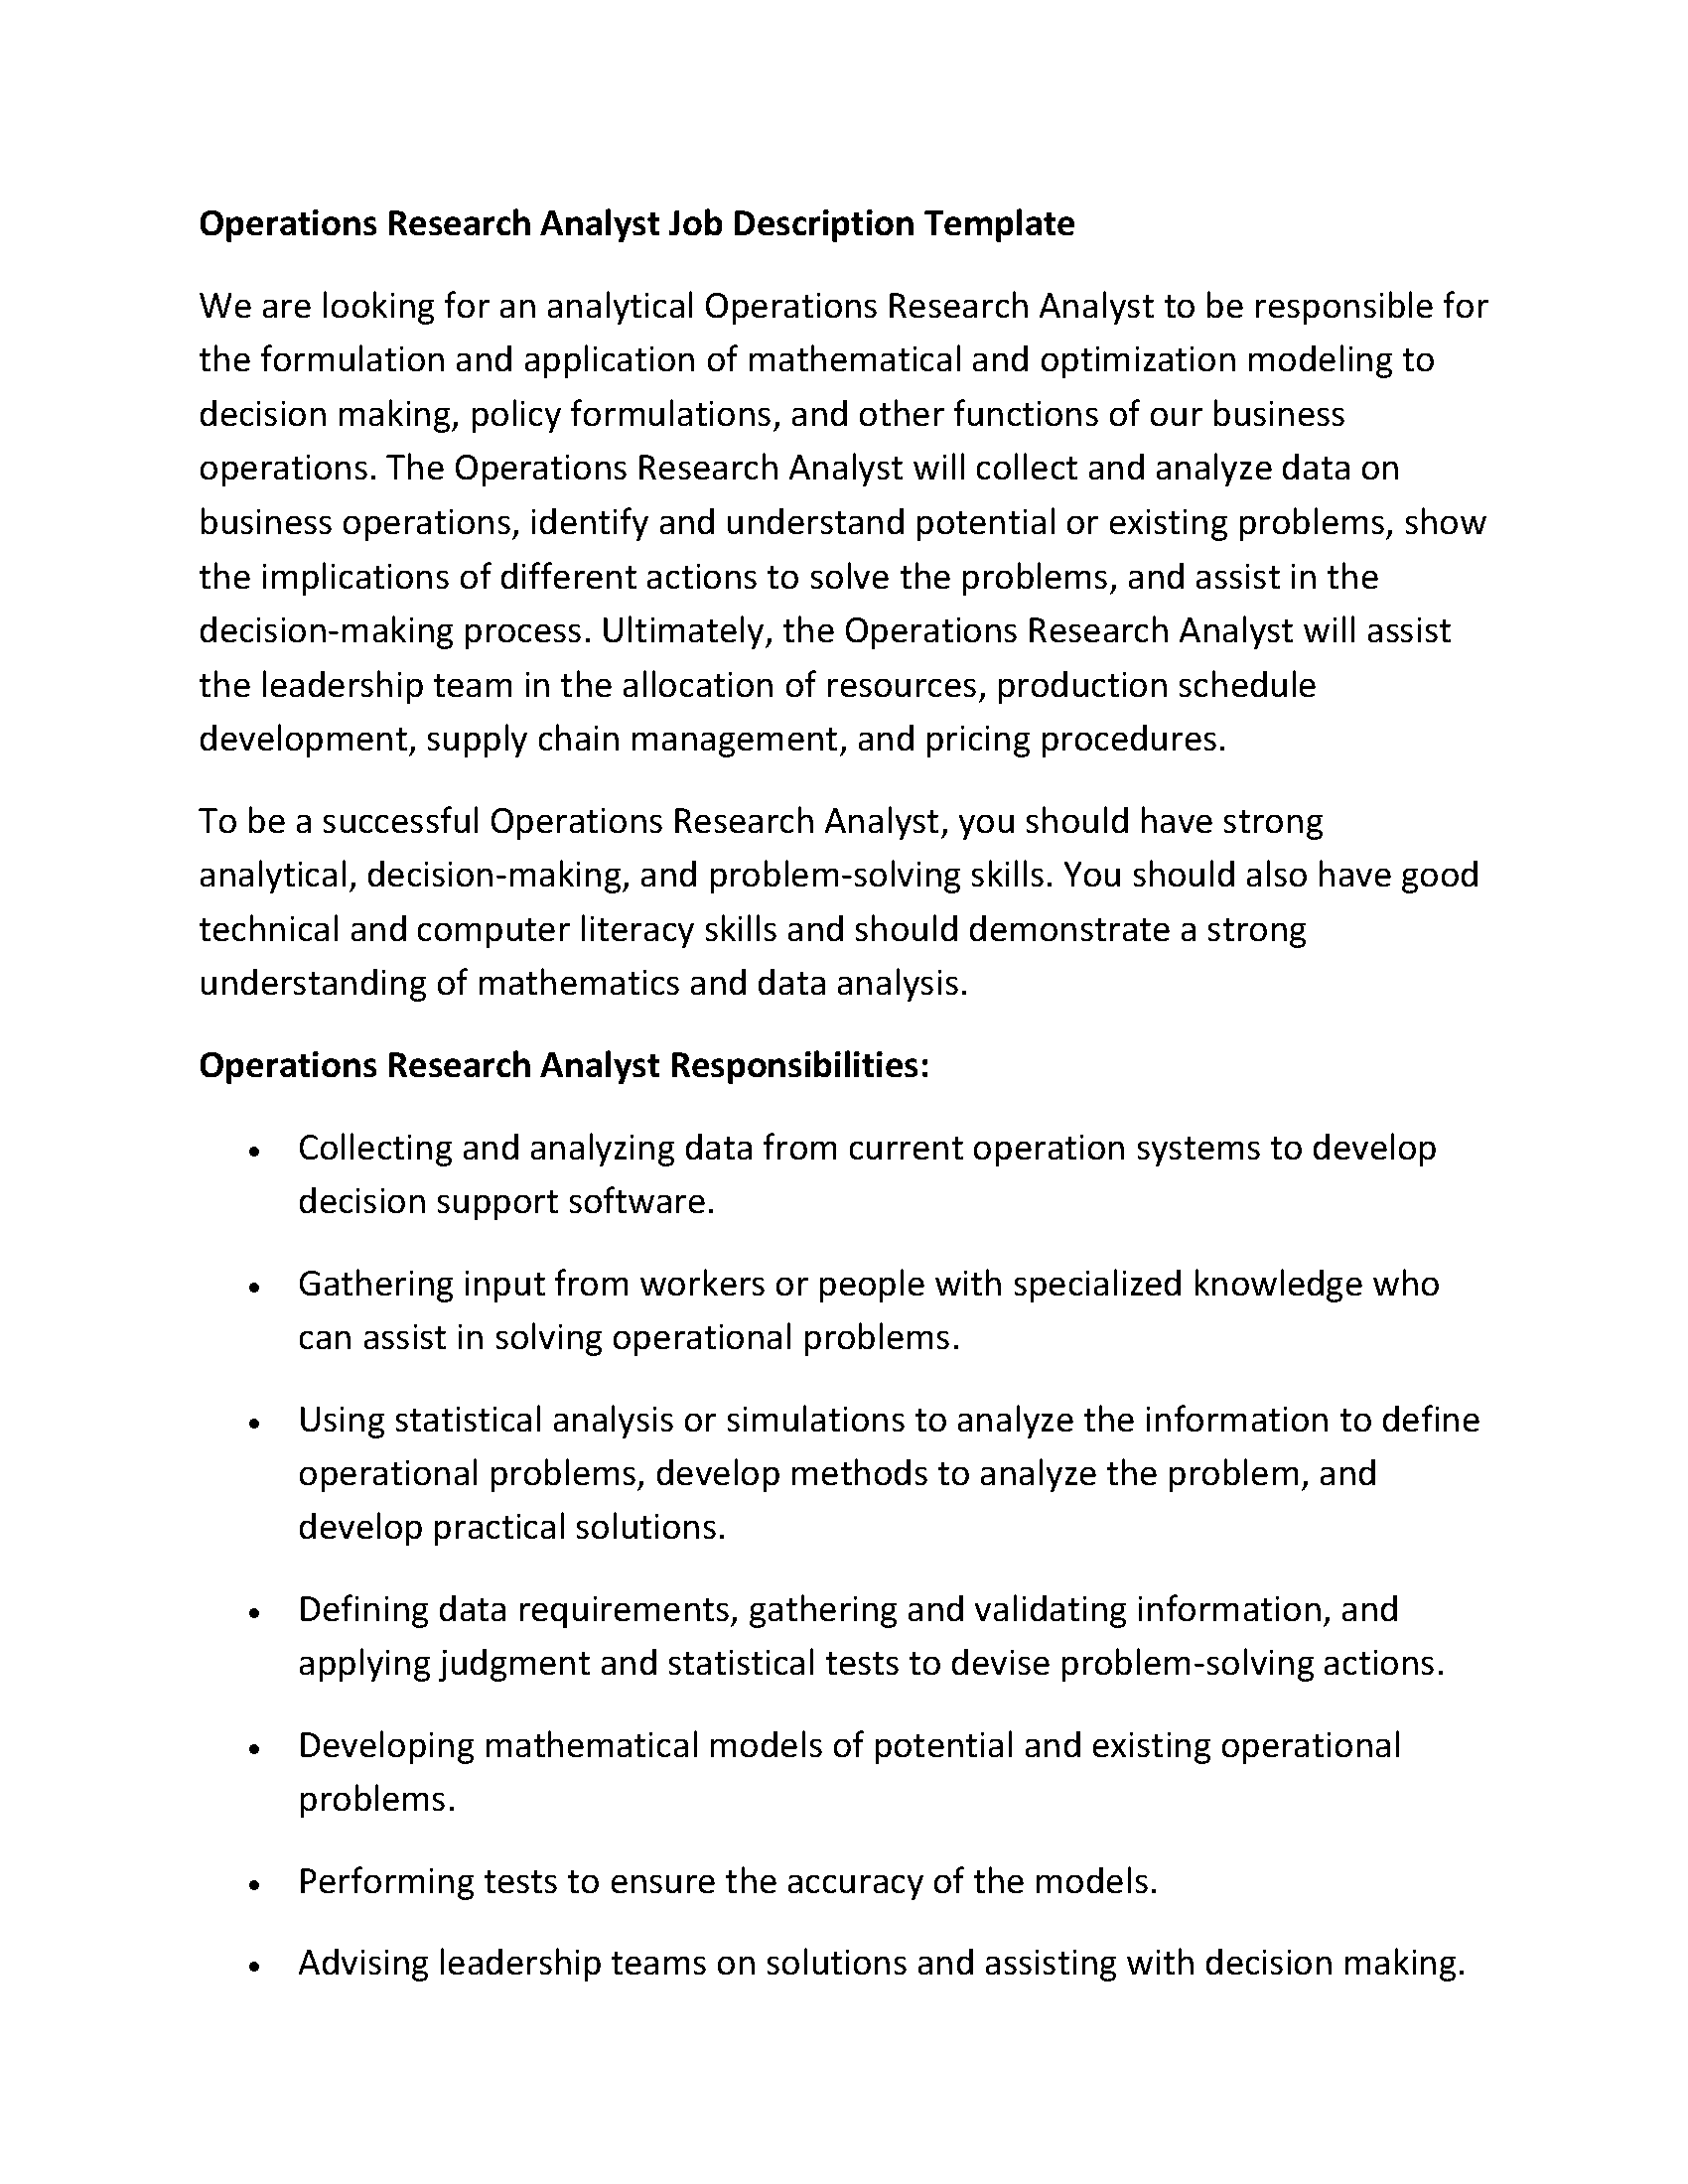 Operations Research Analyst Job Description Template